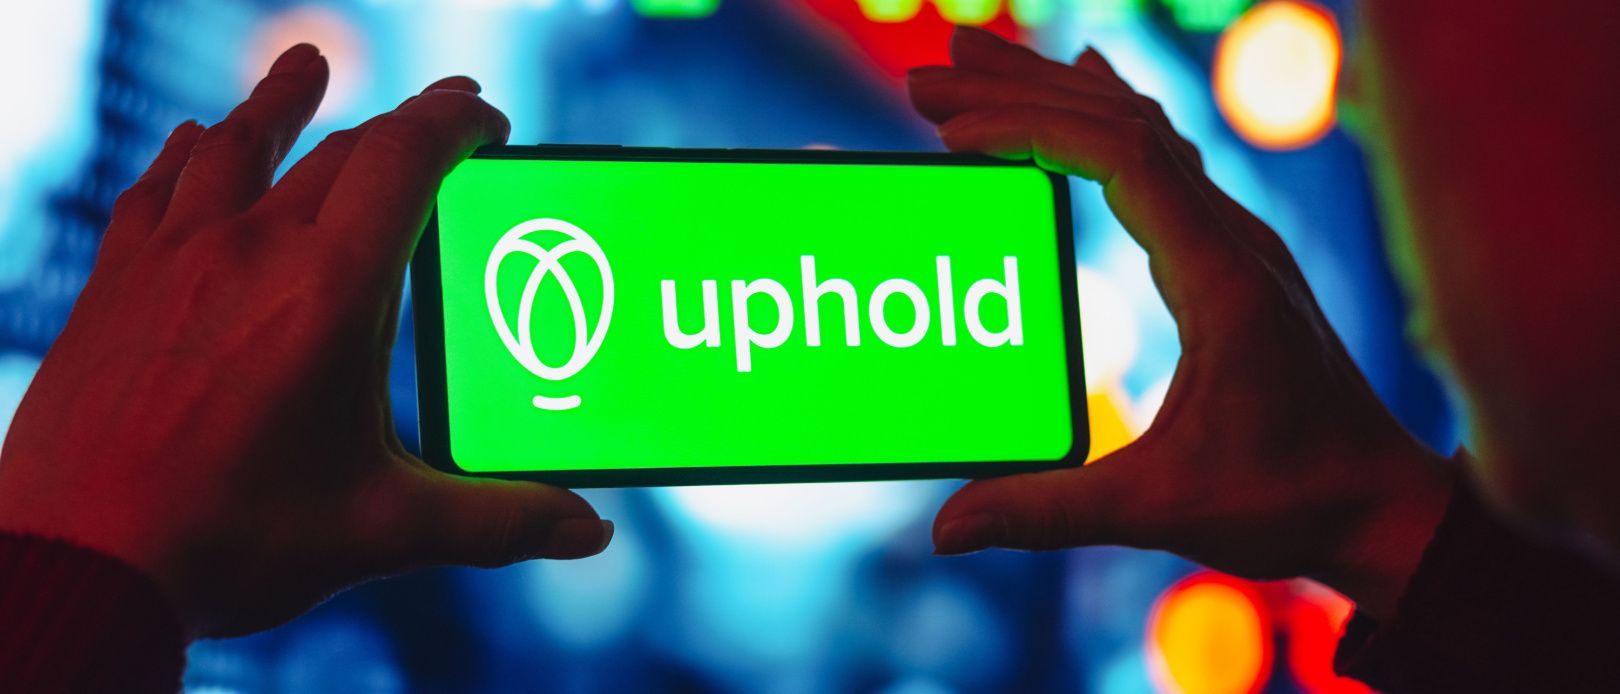 Uphold review